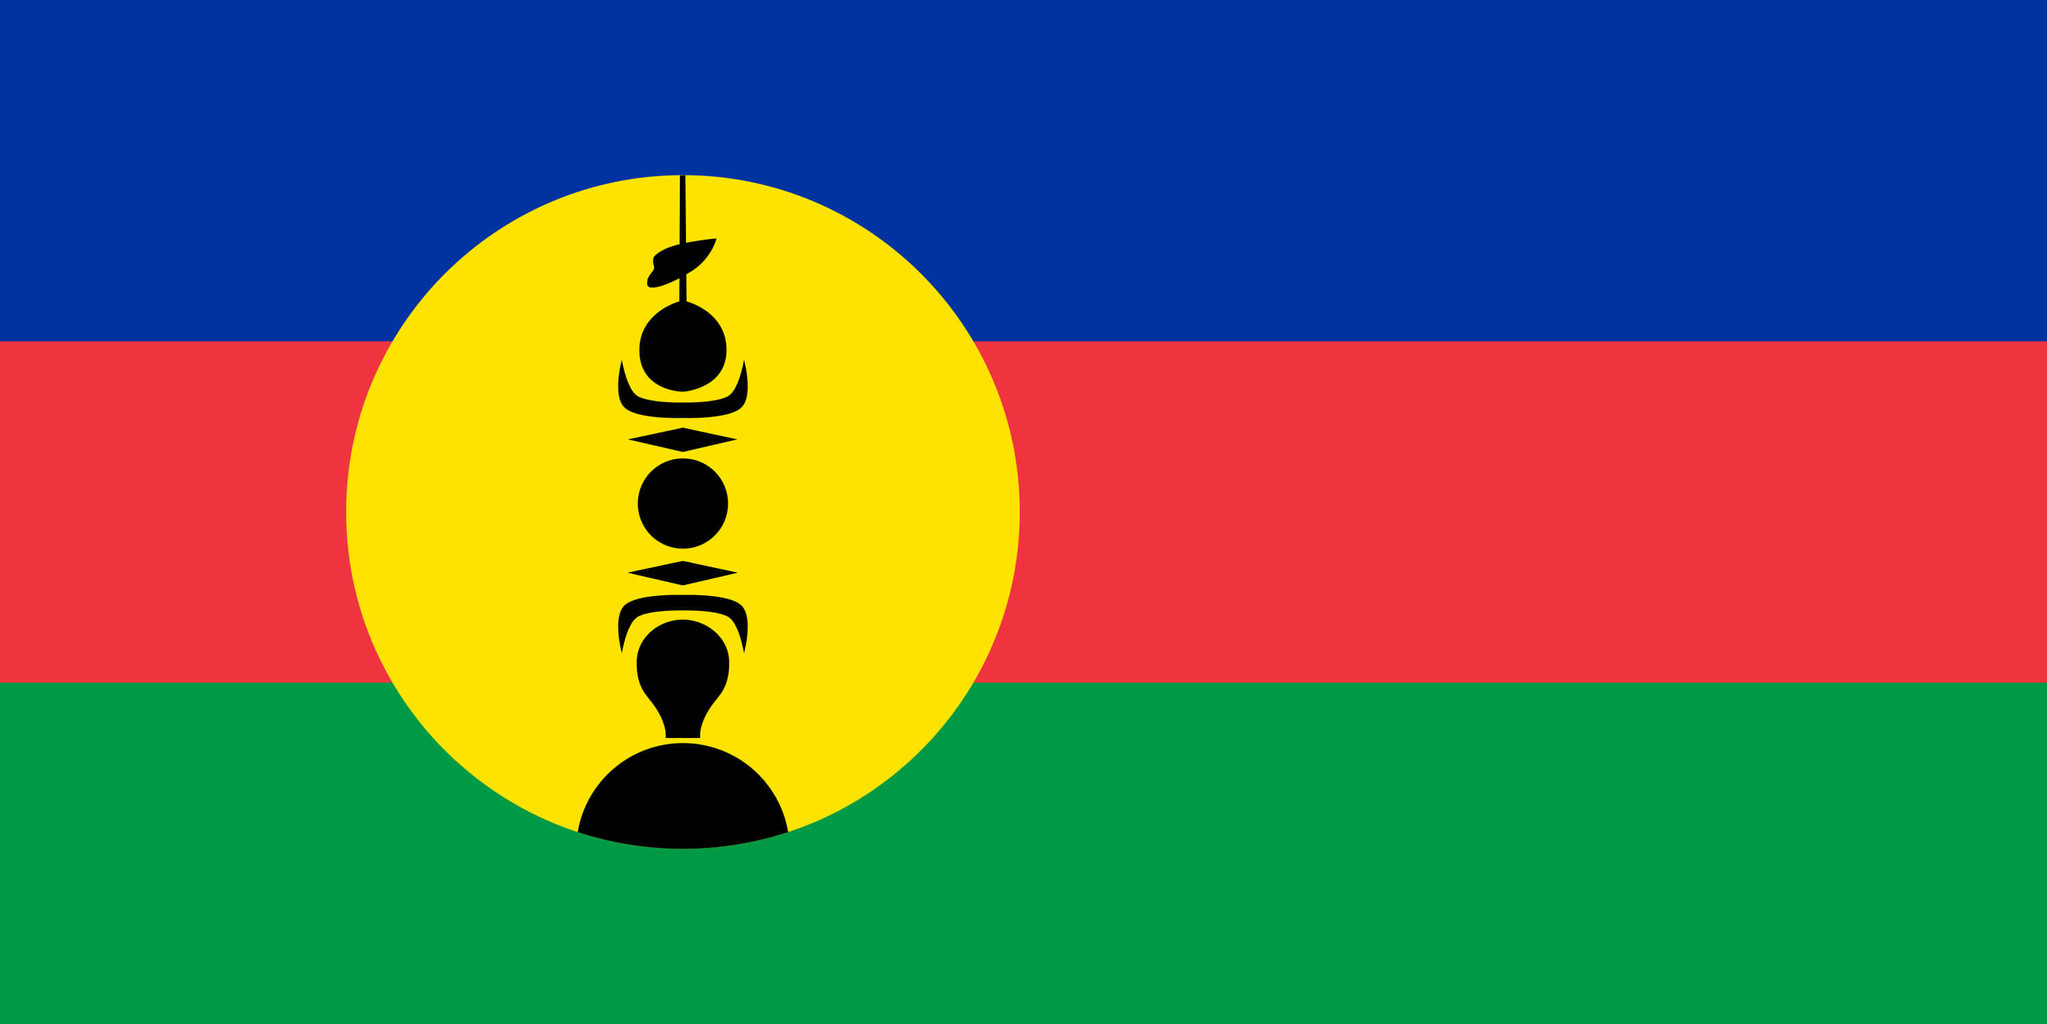 New Caledonian flag coloring - Country flags